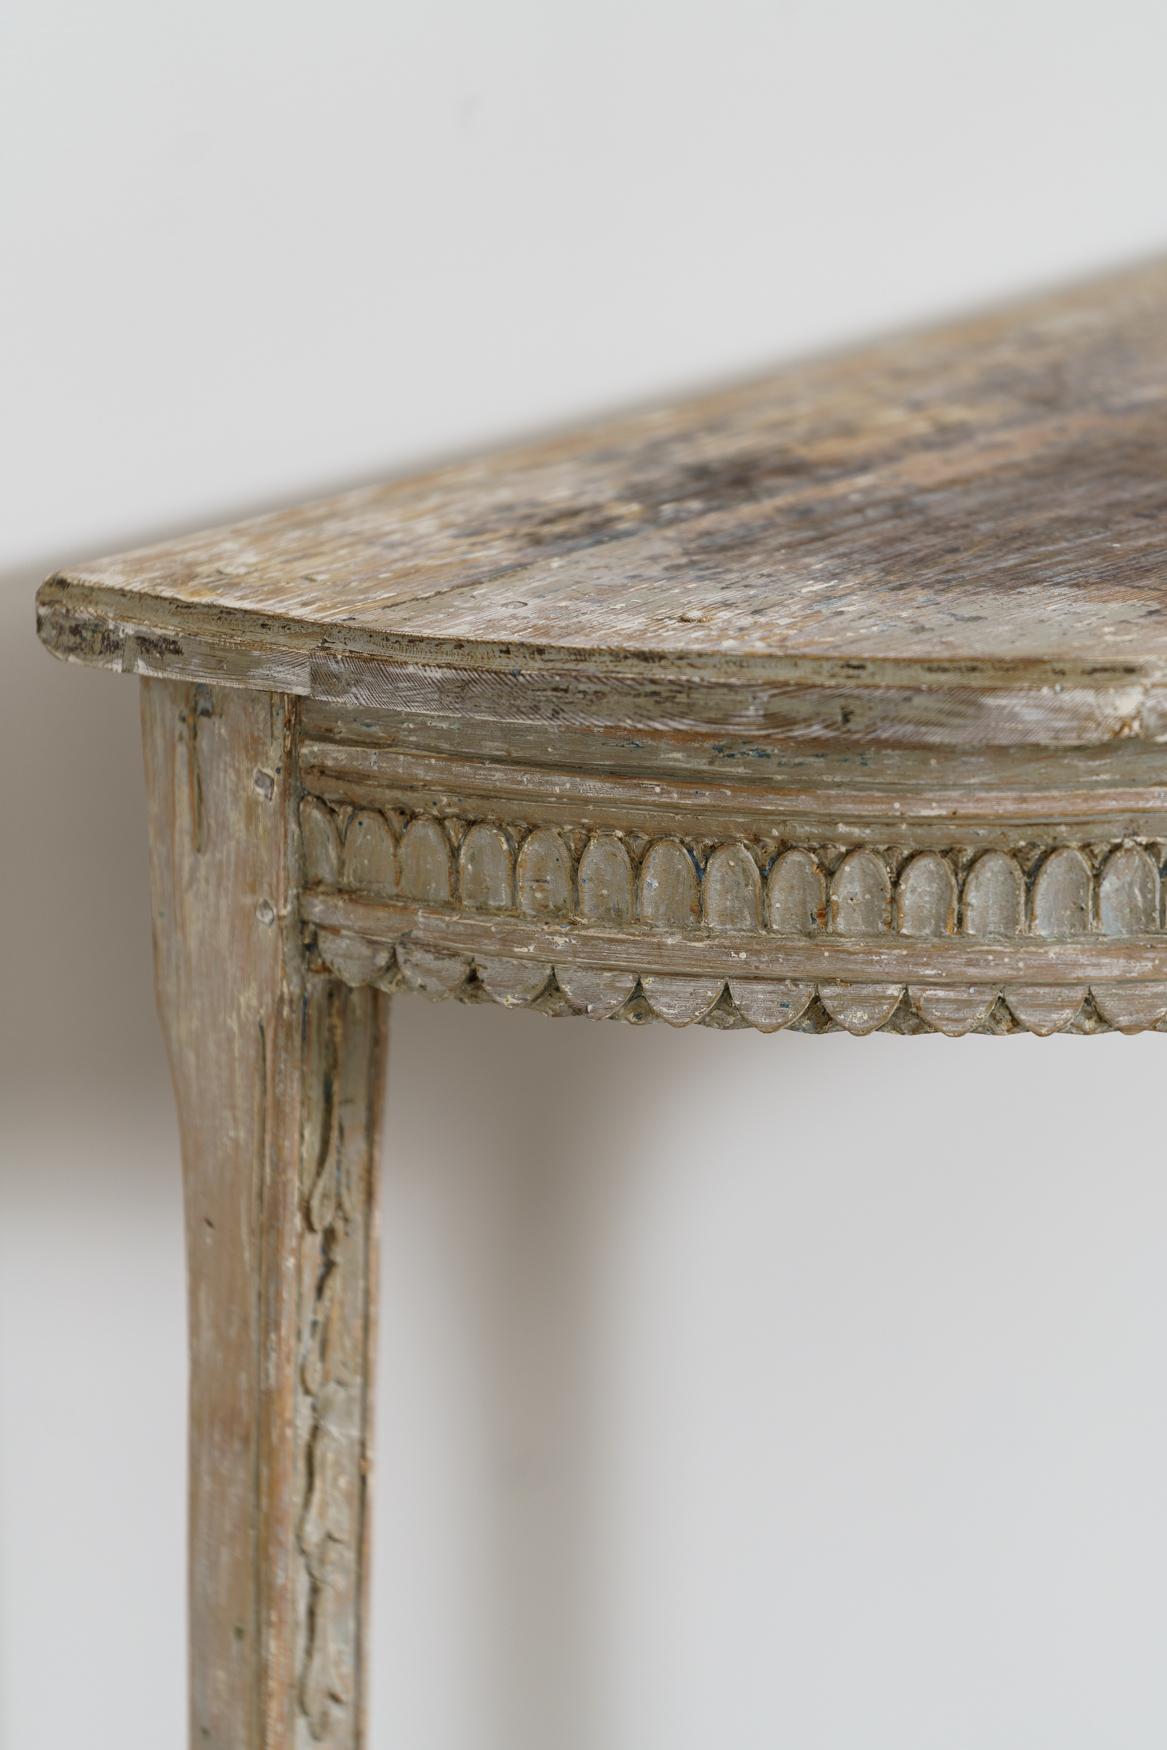 18th Century and Earlier 18th Century Swedish Gustavian Period Demilune Console Table in Original Paint